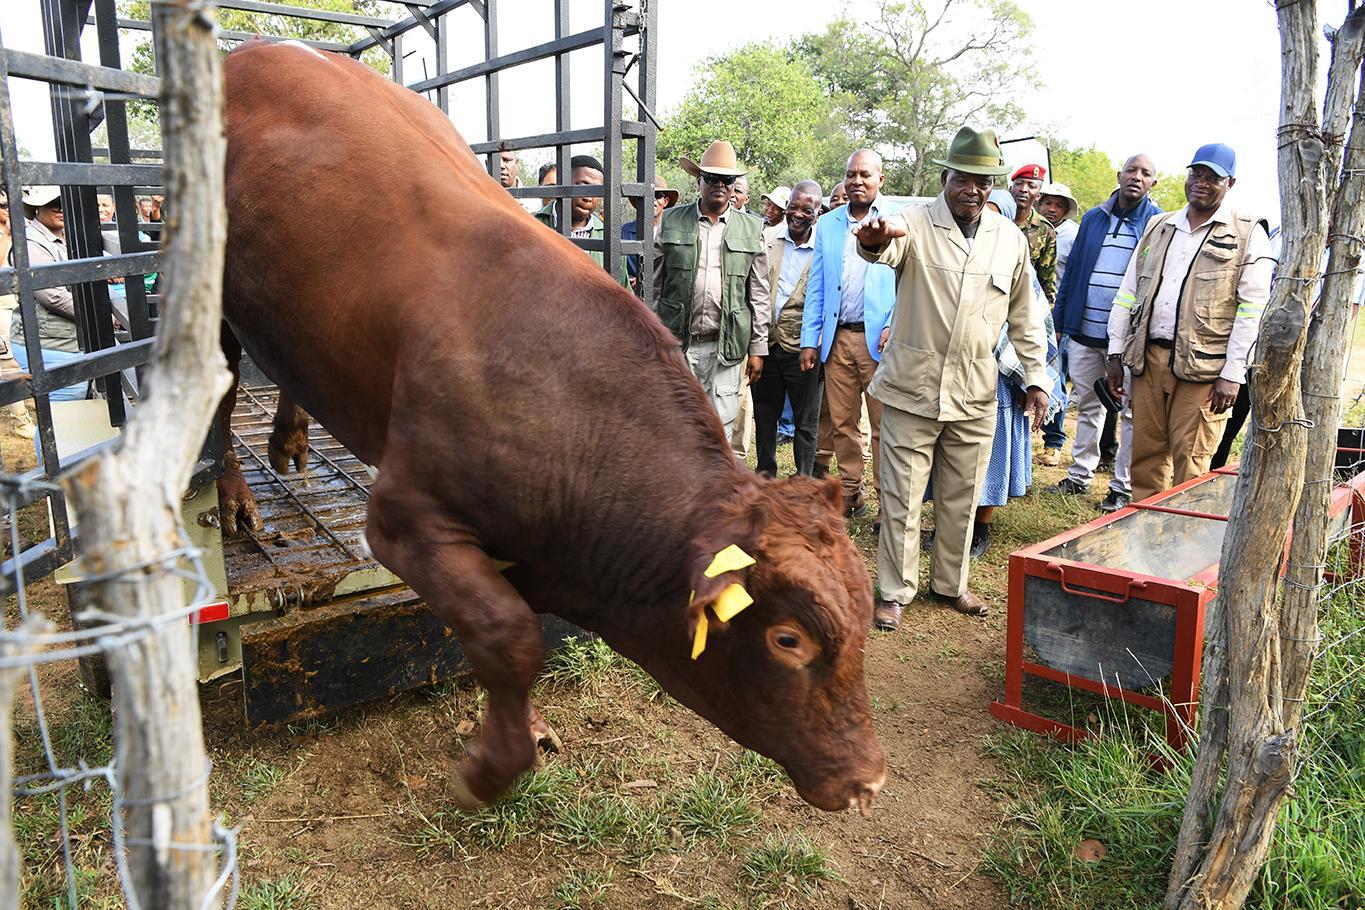 FMD OUTBREAKS THREATENS BEEF INDUSTRY